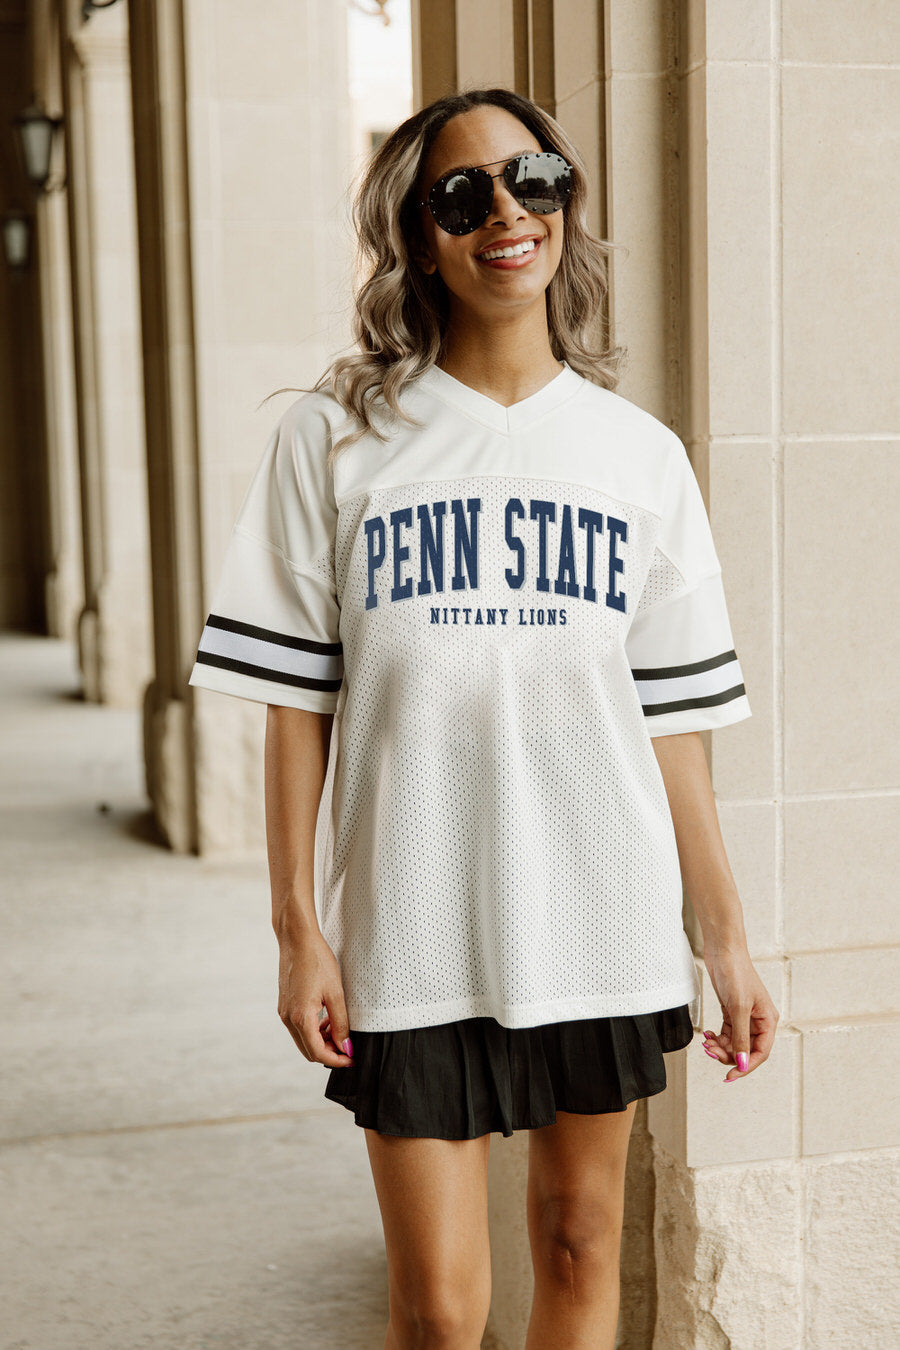 Penn State Nittany Lions Rookie Move Iconic Oversized Fashion Jersey